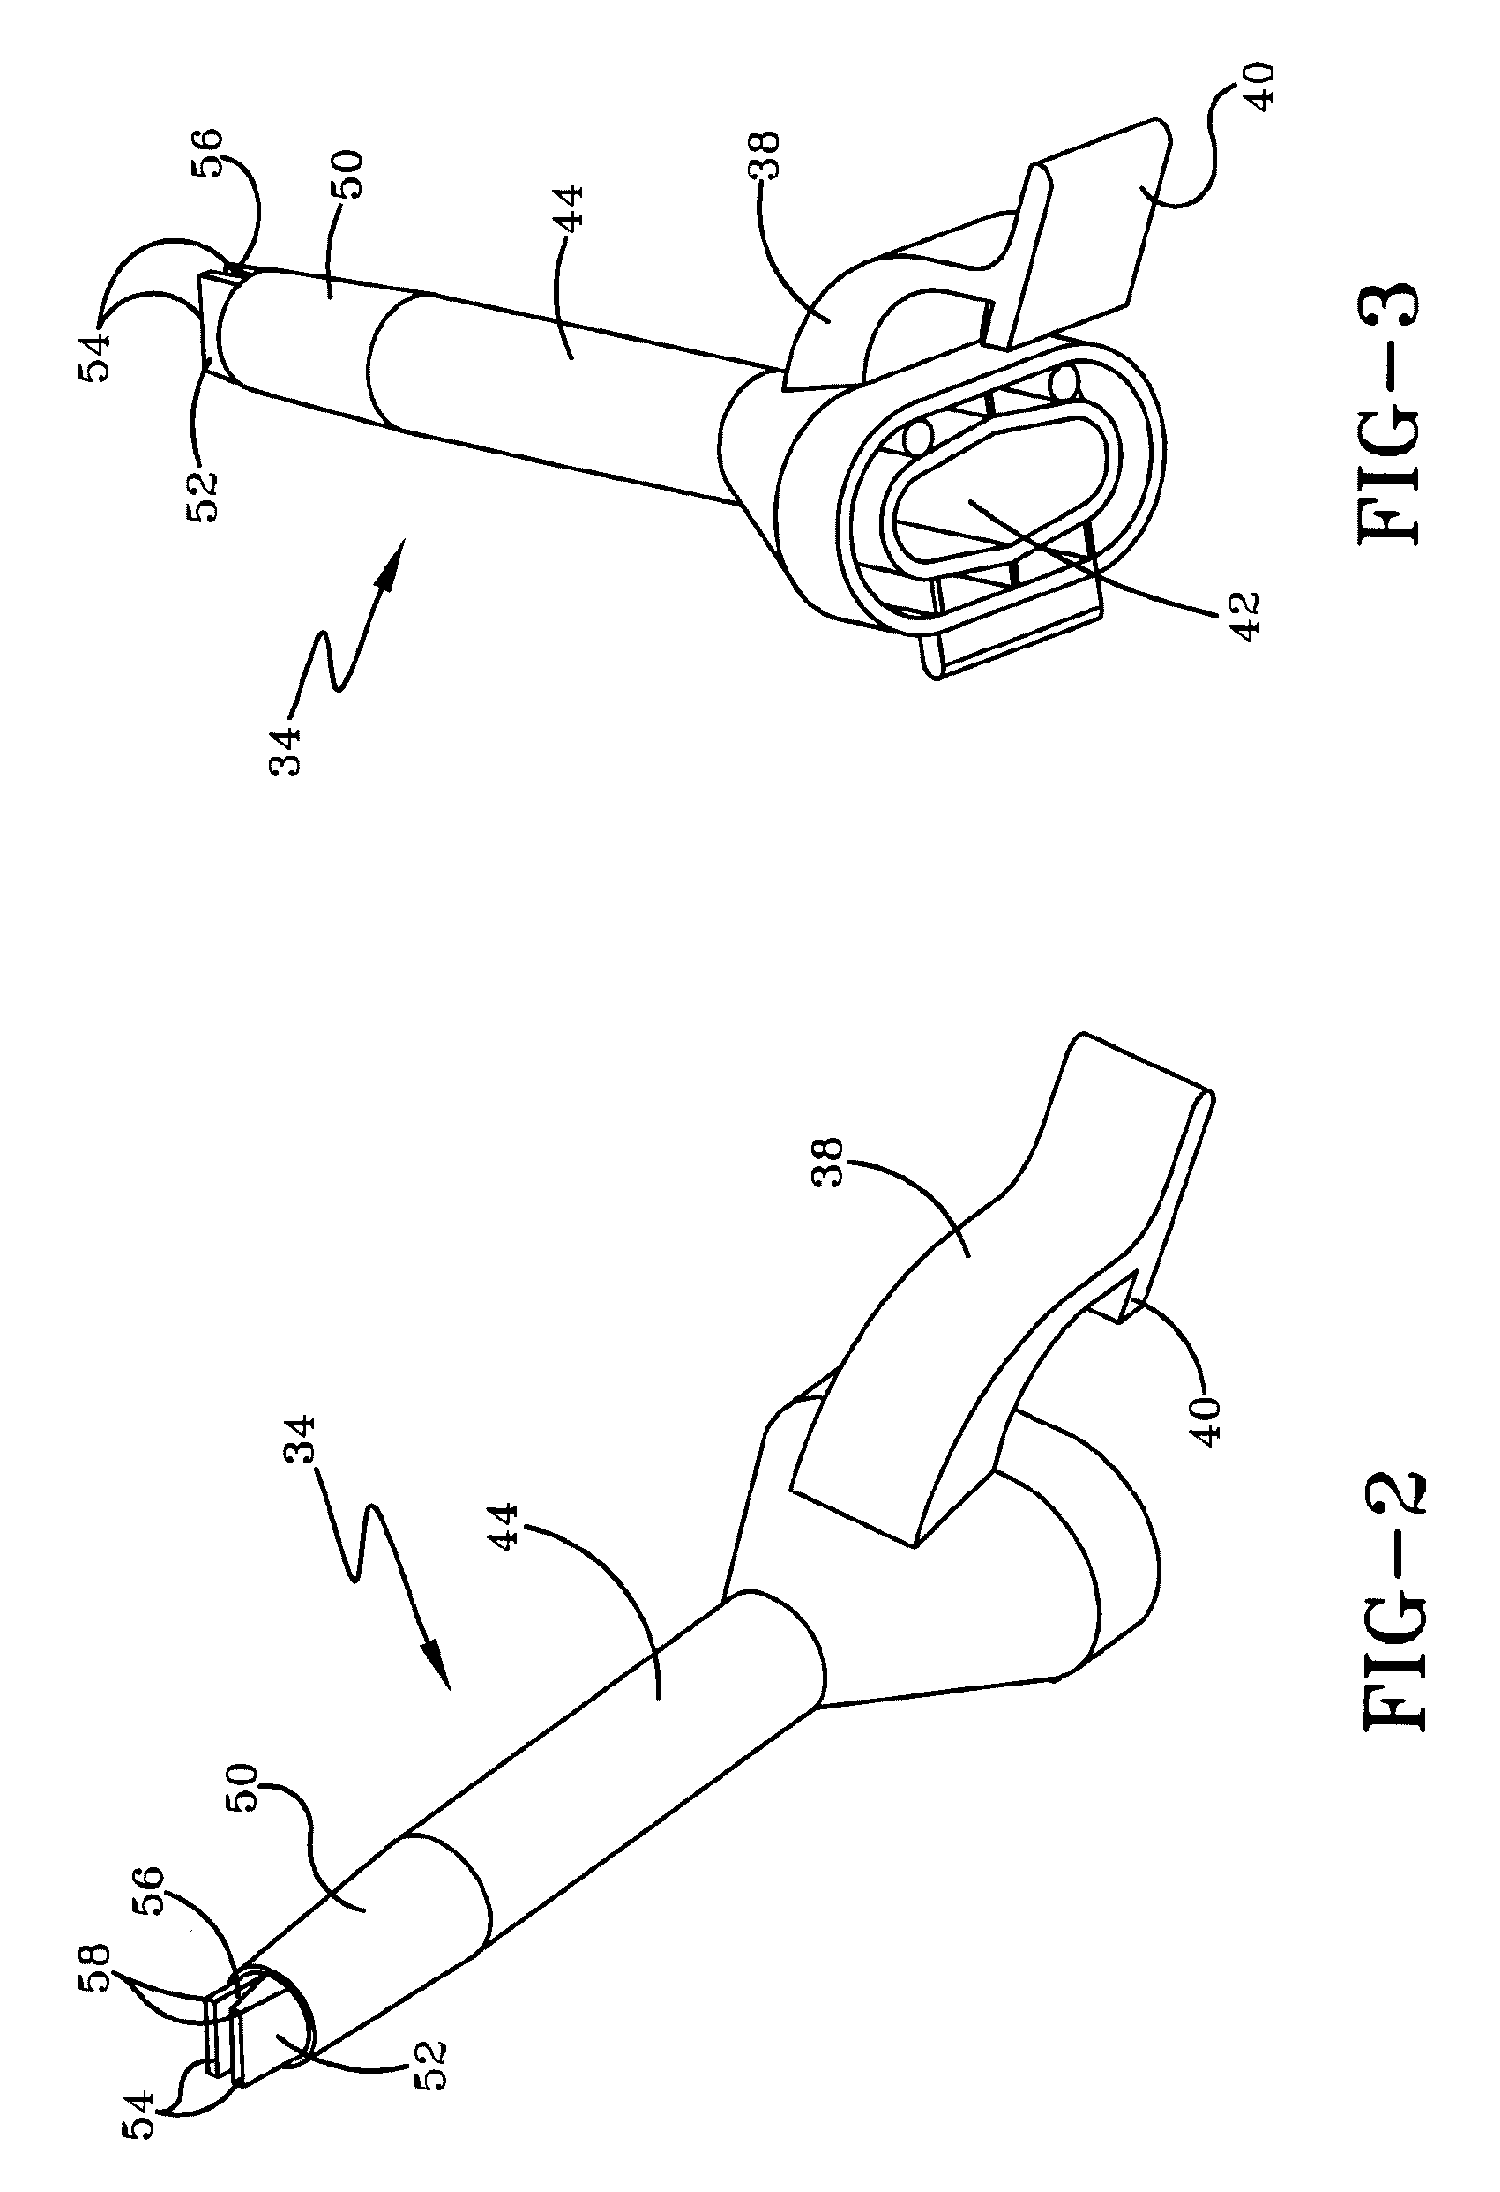 Method for Rapid Insulation of Expanses